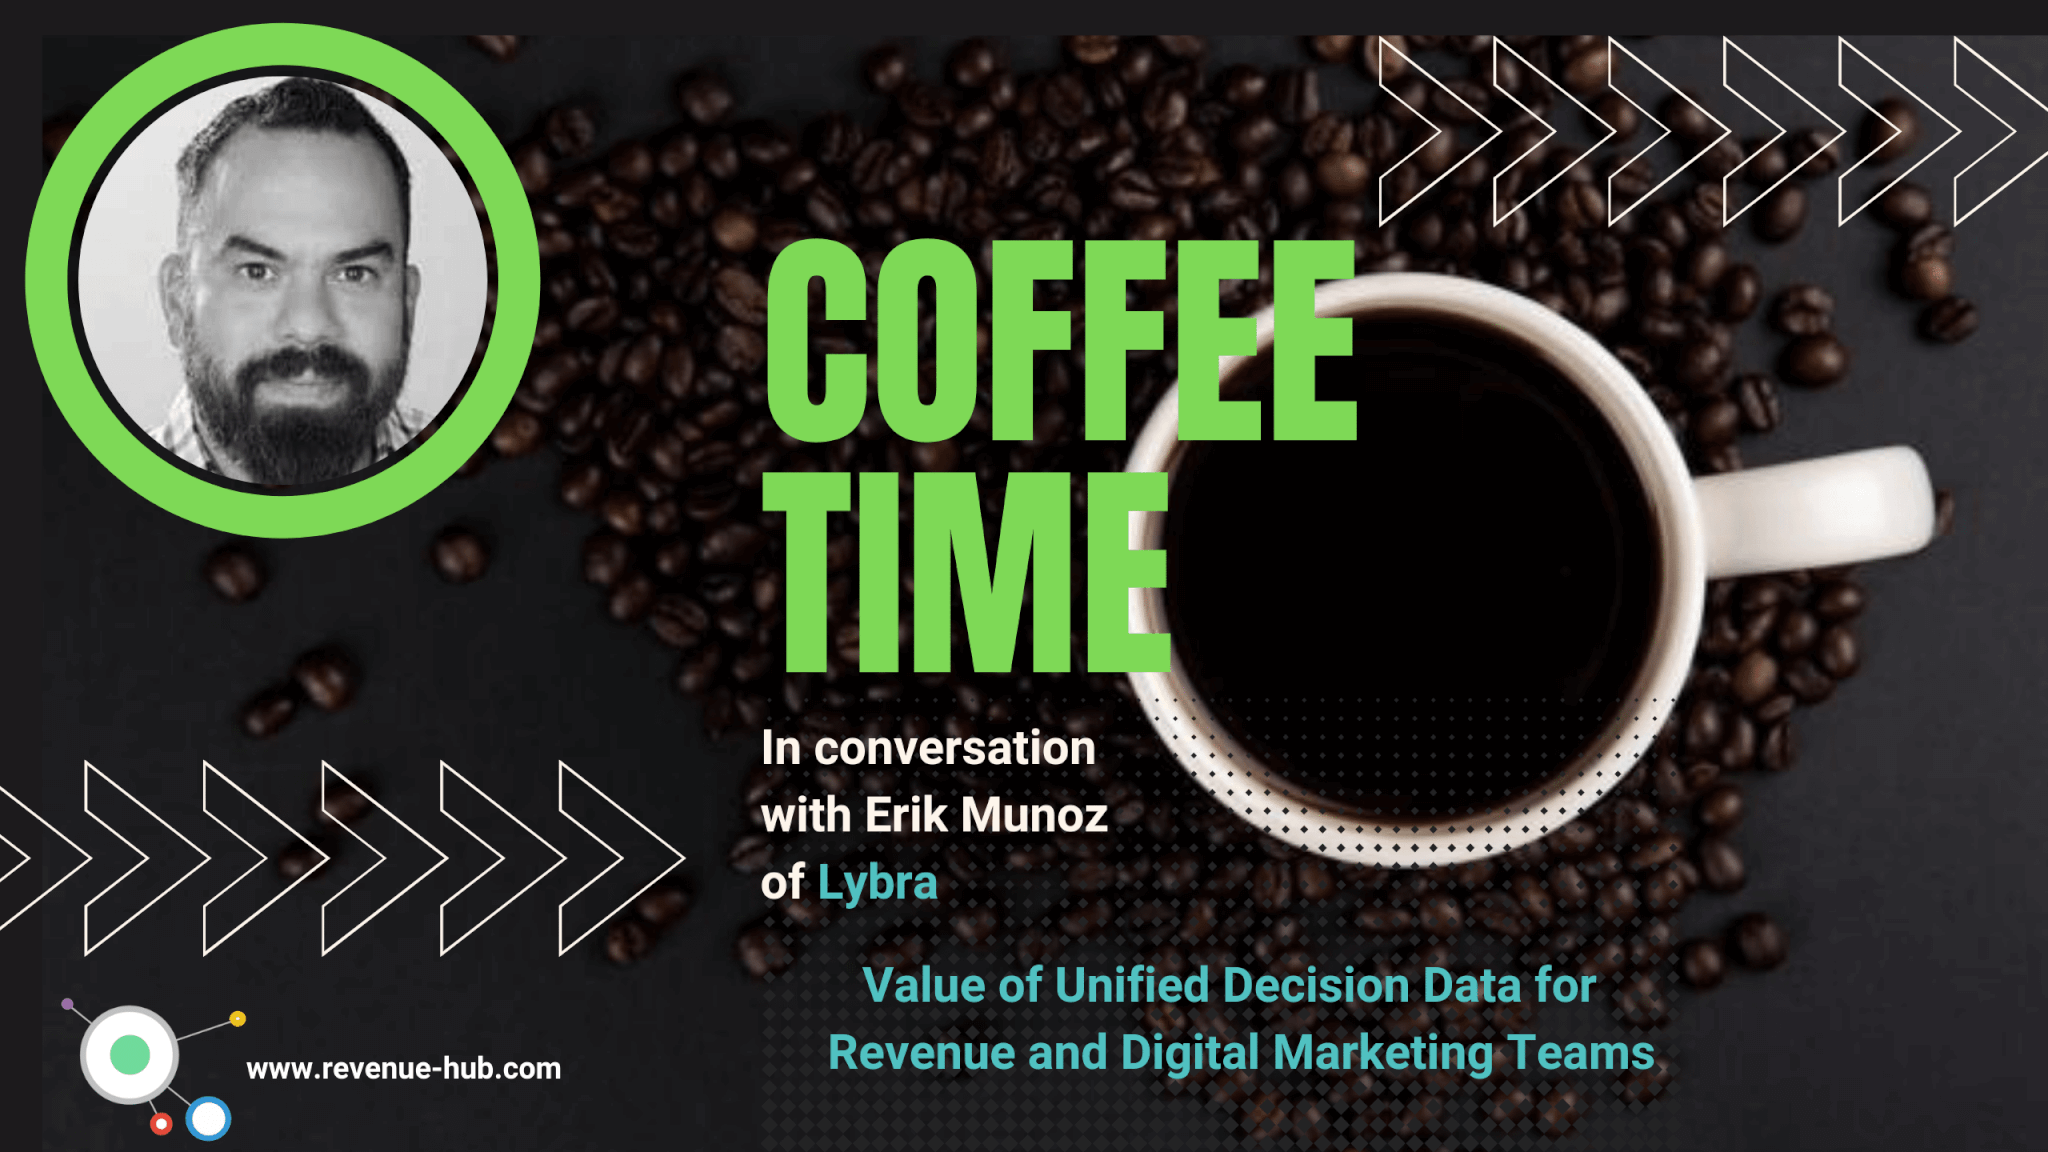 video thumbnail for coffee time chat with erik munoz of lybra about unified decision data for hotel revenue and digital marketing teams